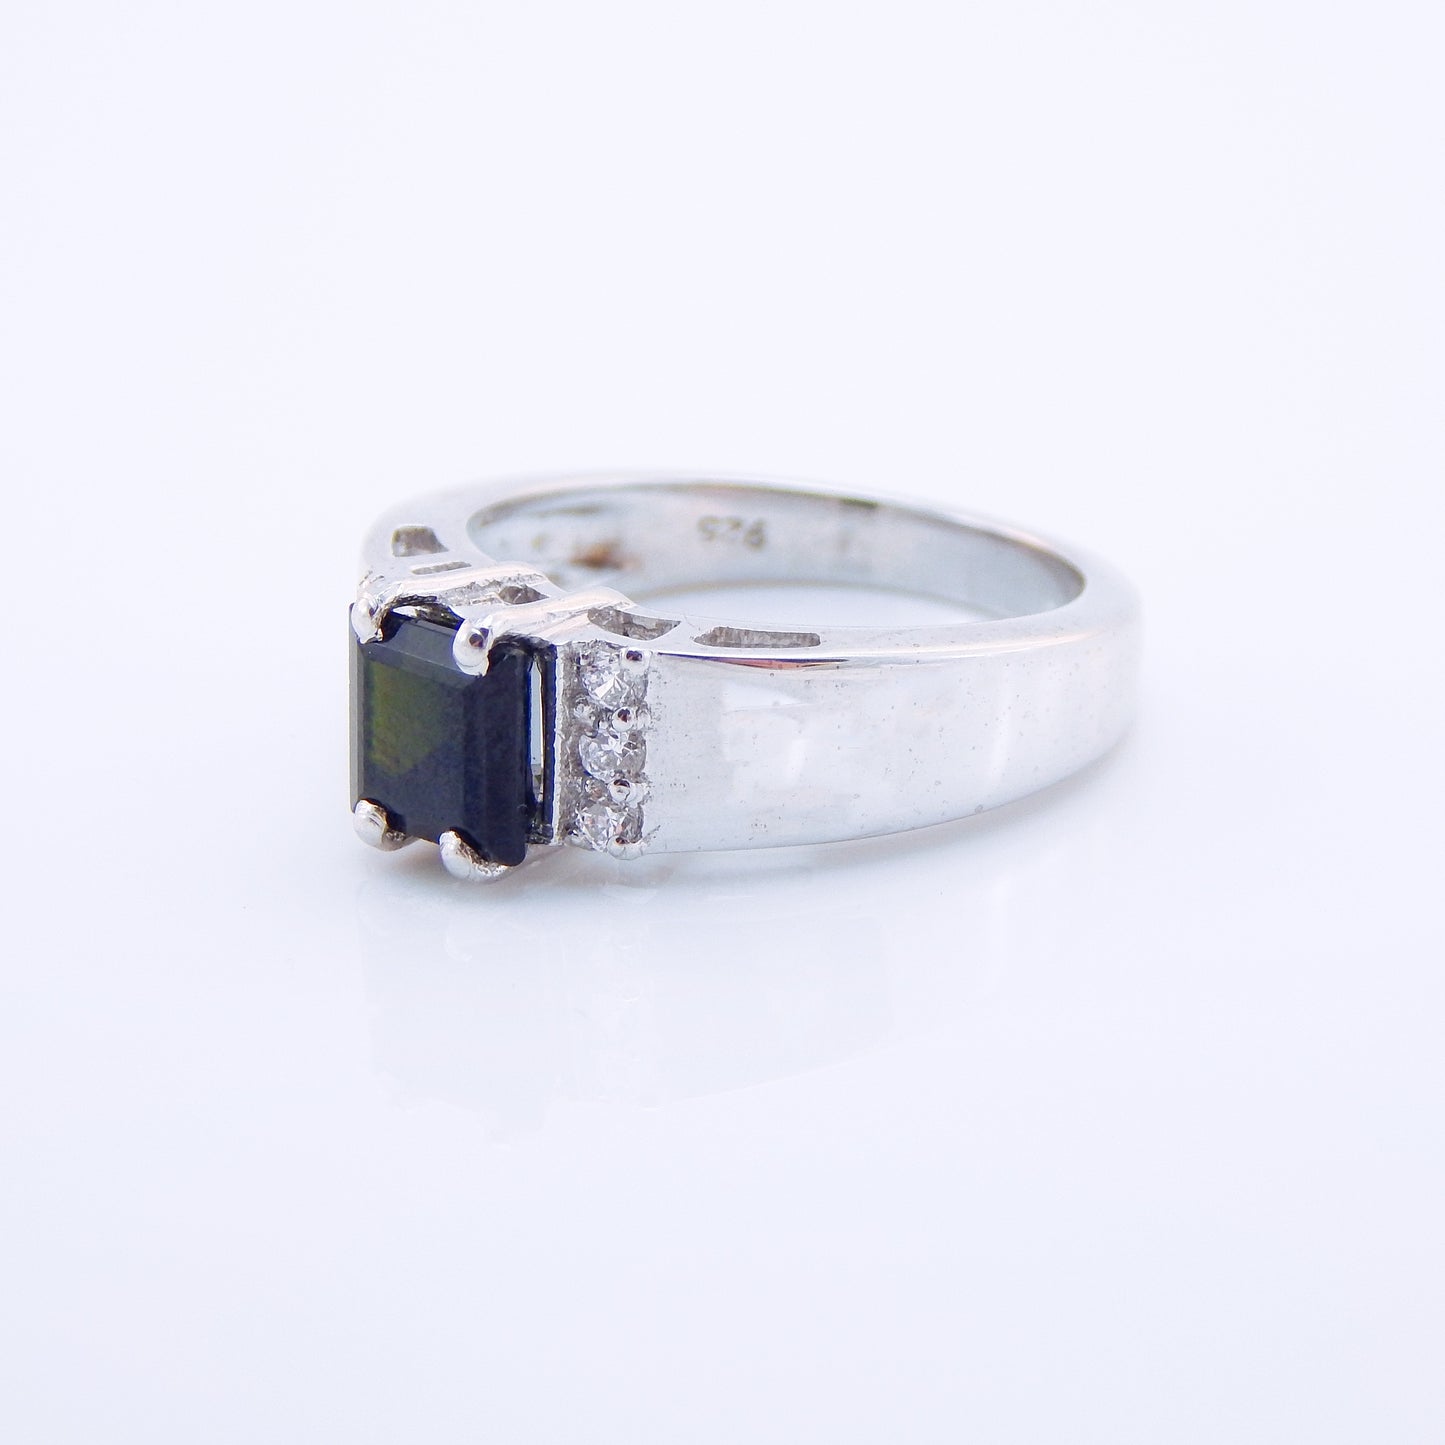 Genuine Green Tourmaline Cushion Cut Ring in 925 Sterling Silver